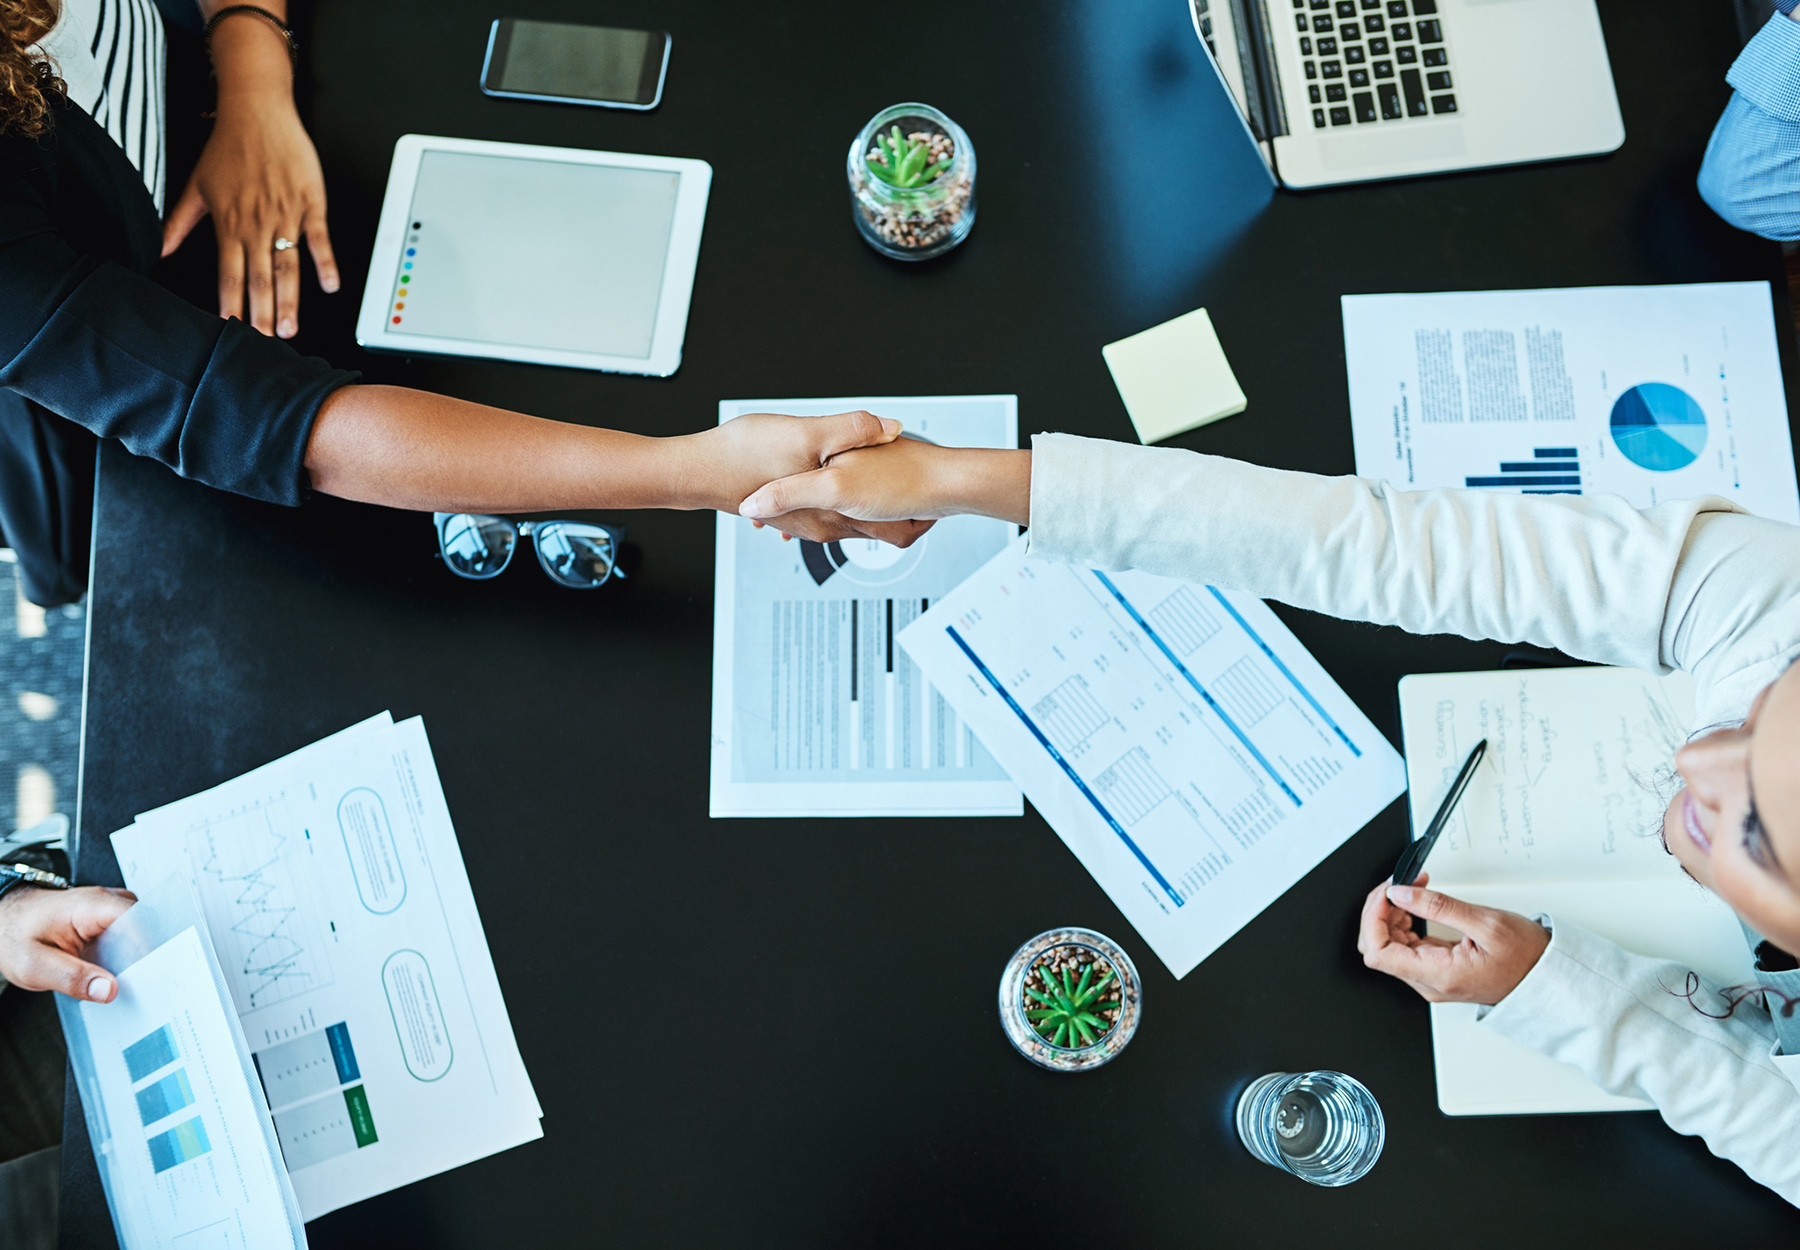 Closeup of businesspeople shaking hands during a meeting in an office. Business deal concept. Stock image.